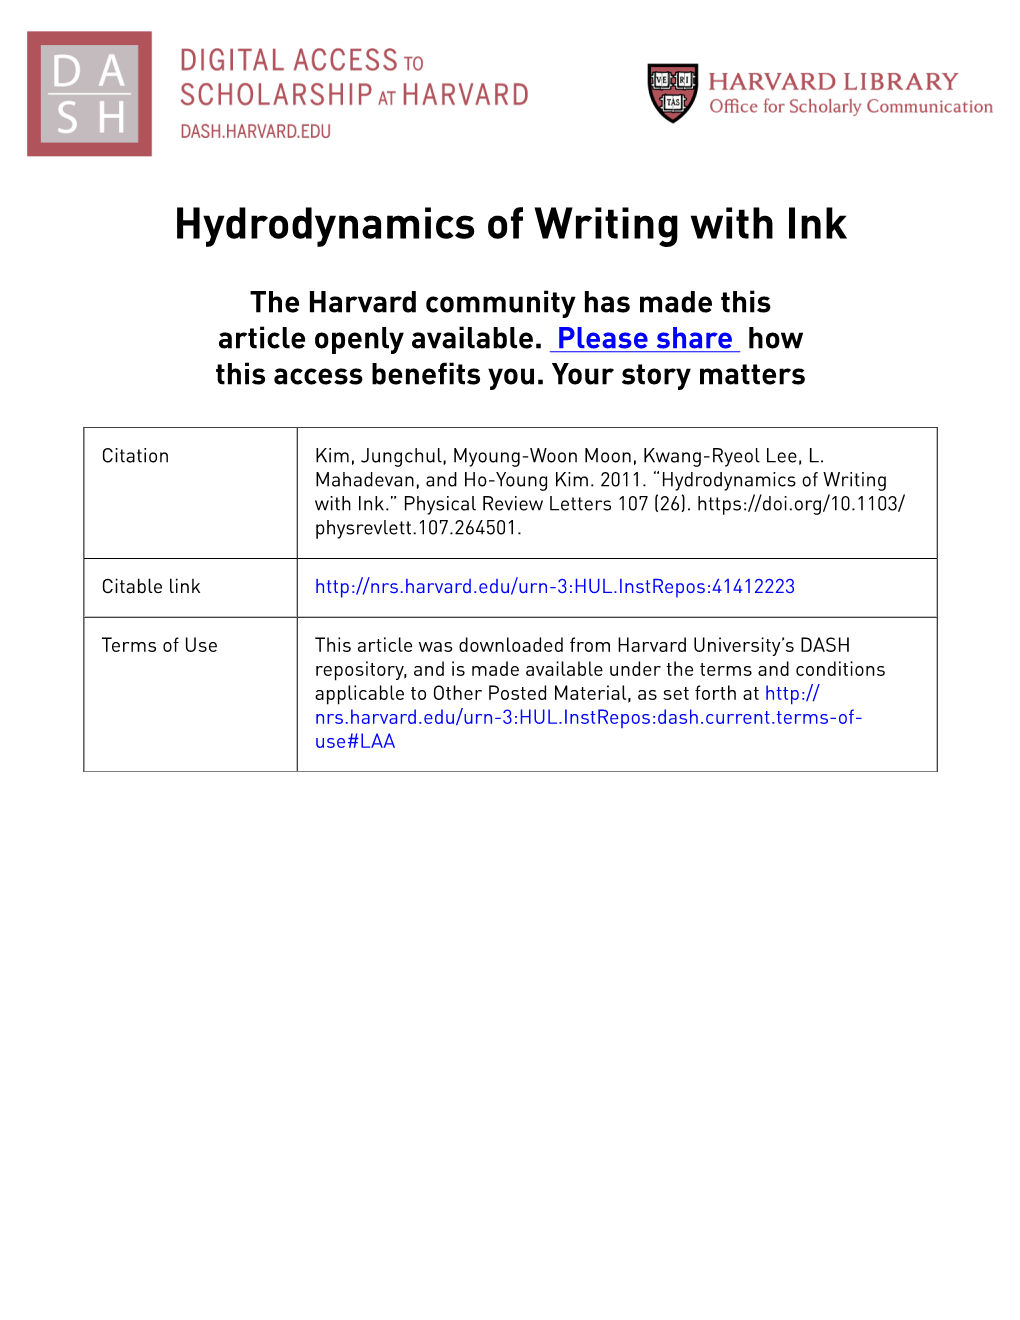 Hydrodynamics of Writing with Ink